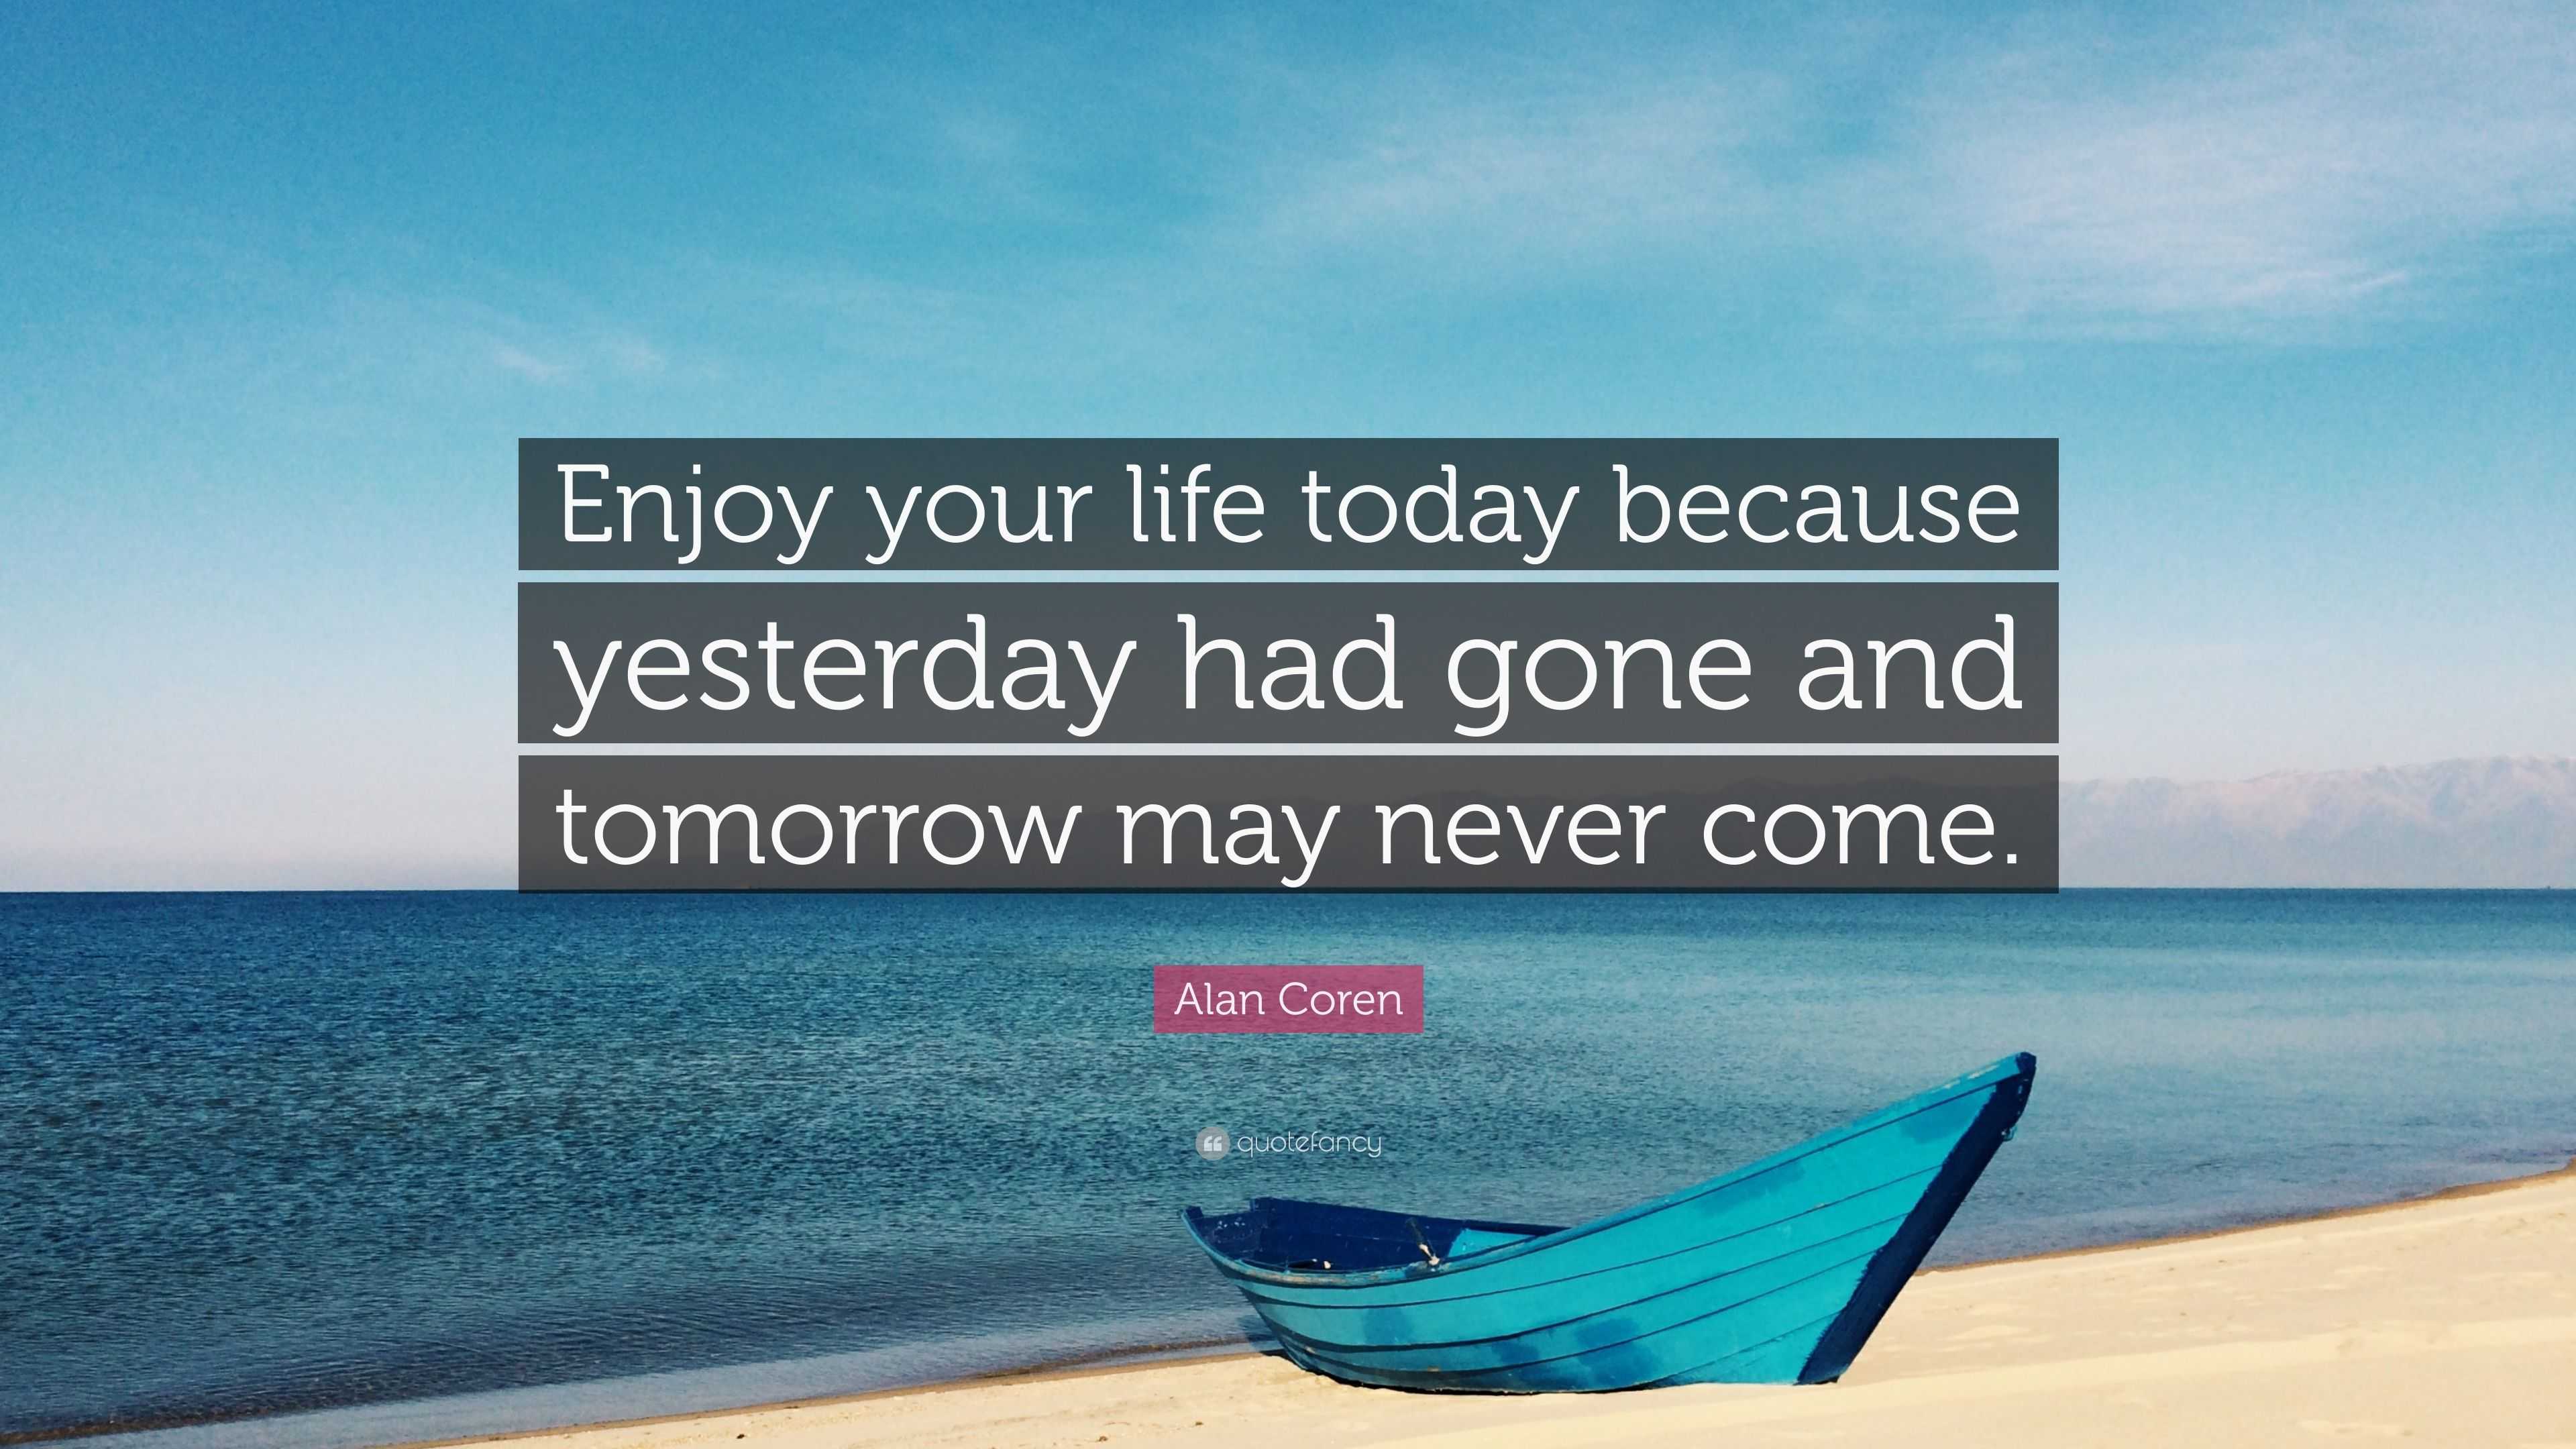 Alan Coren Quote “Enjoy your life today because yesterday had gone and tomorrow may